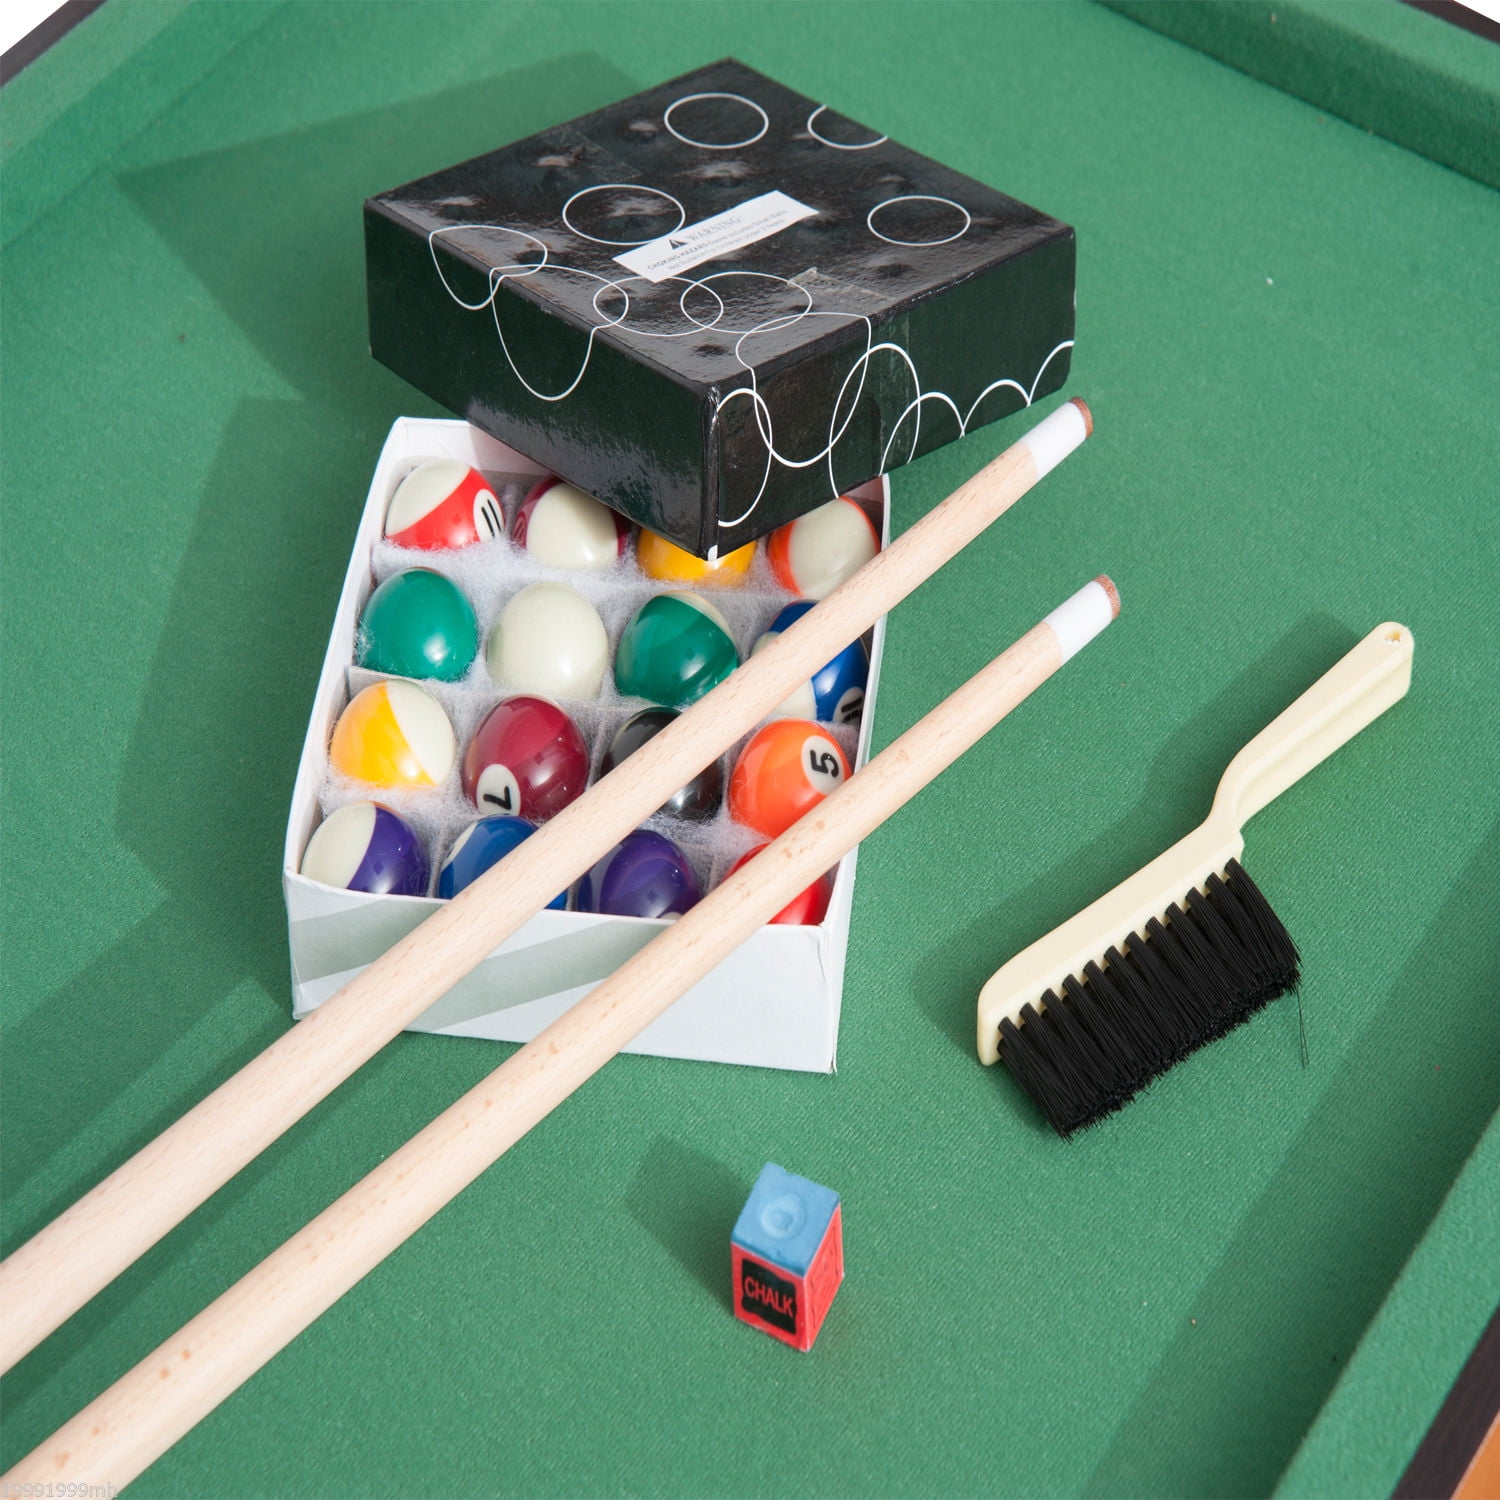 Ball Soozier Portable Foldable Free Standing Brush Mini Billiard Table for Kids w/ All Accessories Home Pool Game Table 54.3 L Includes Cues Chalk Rack